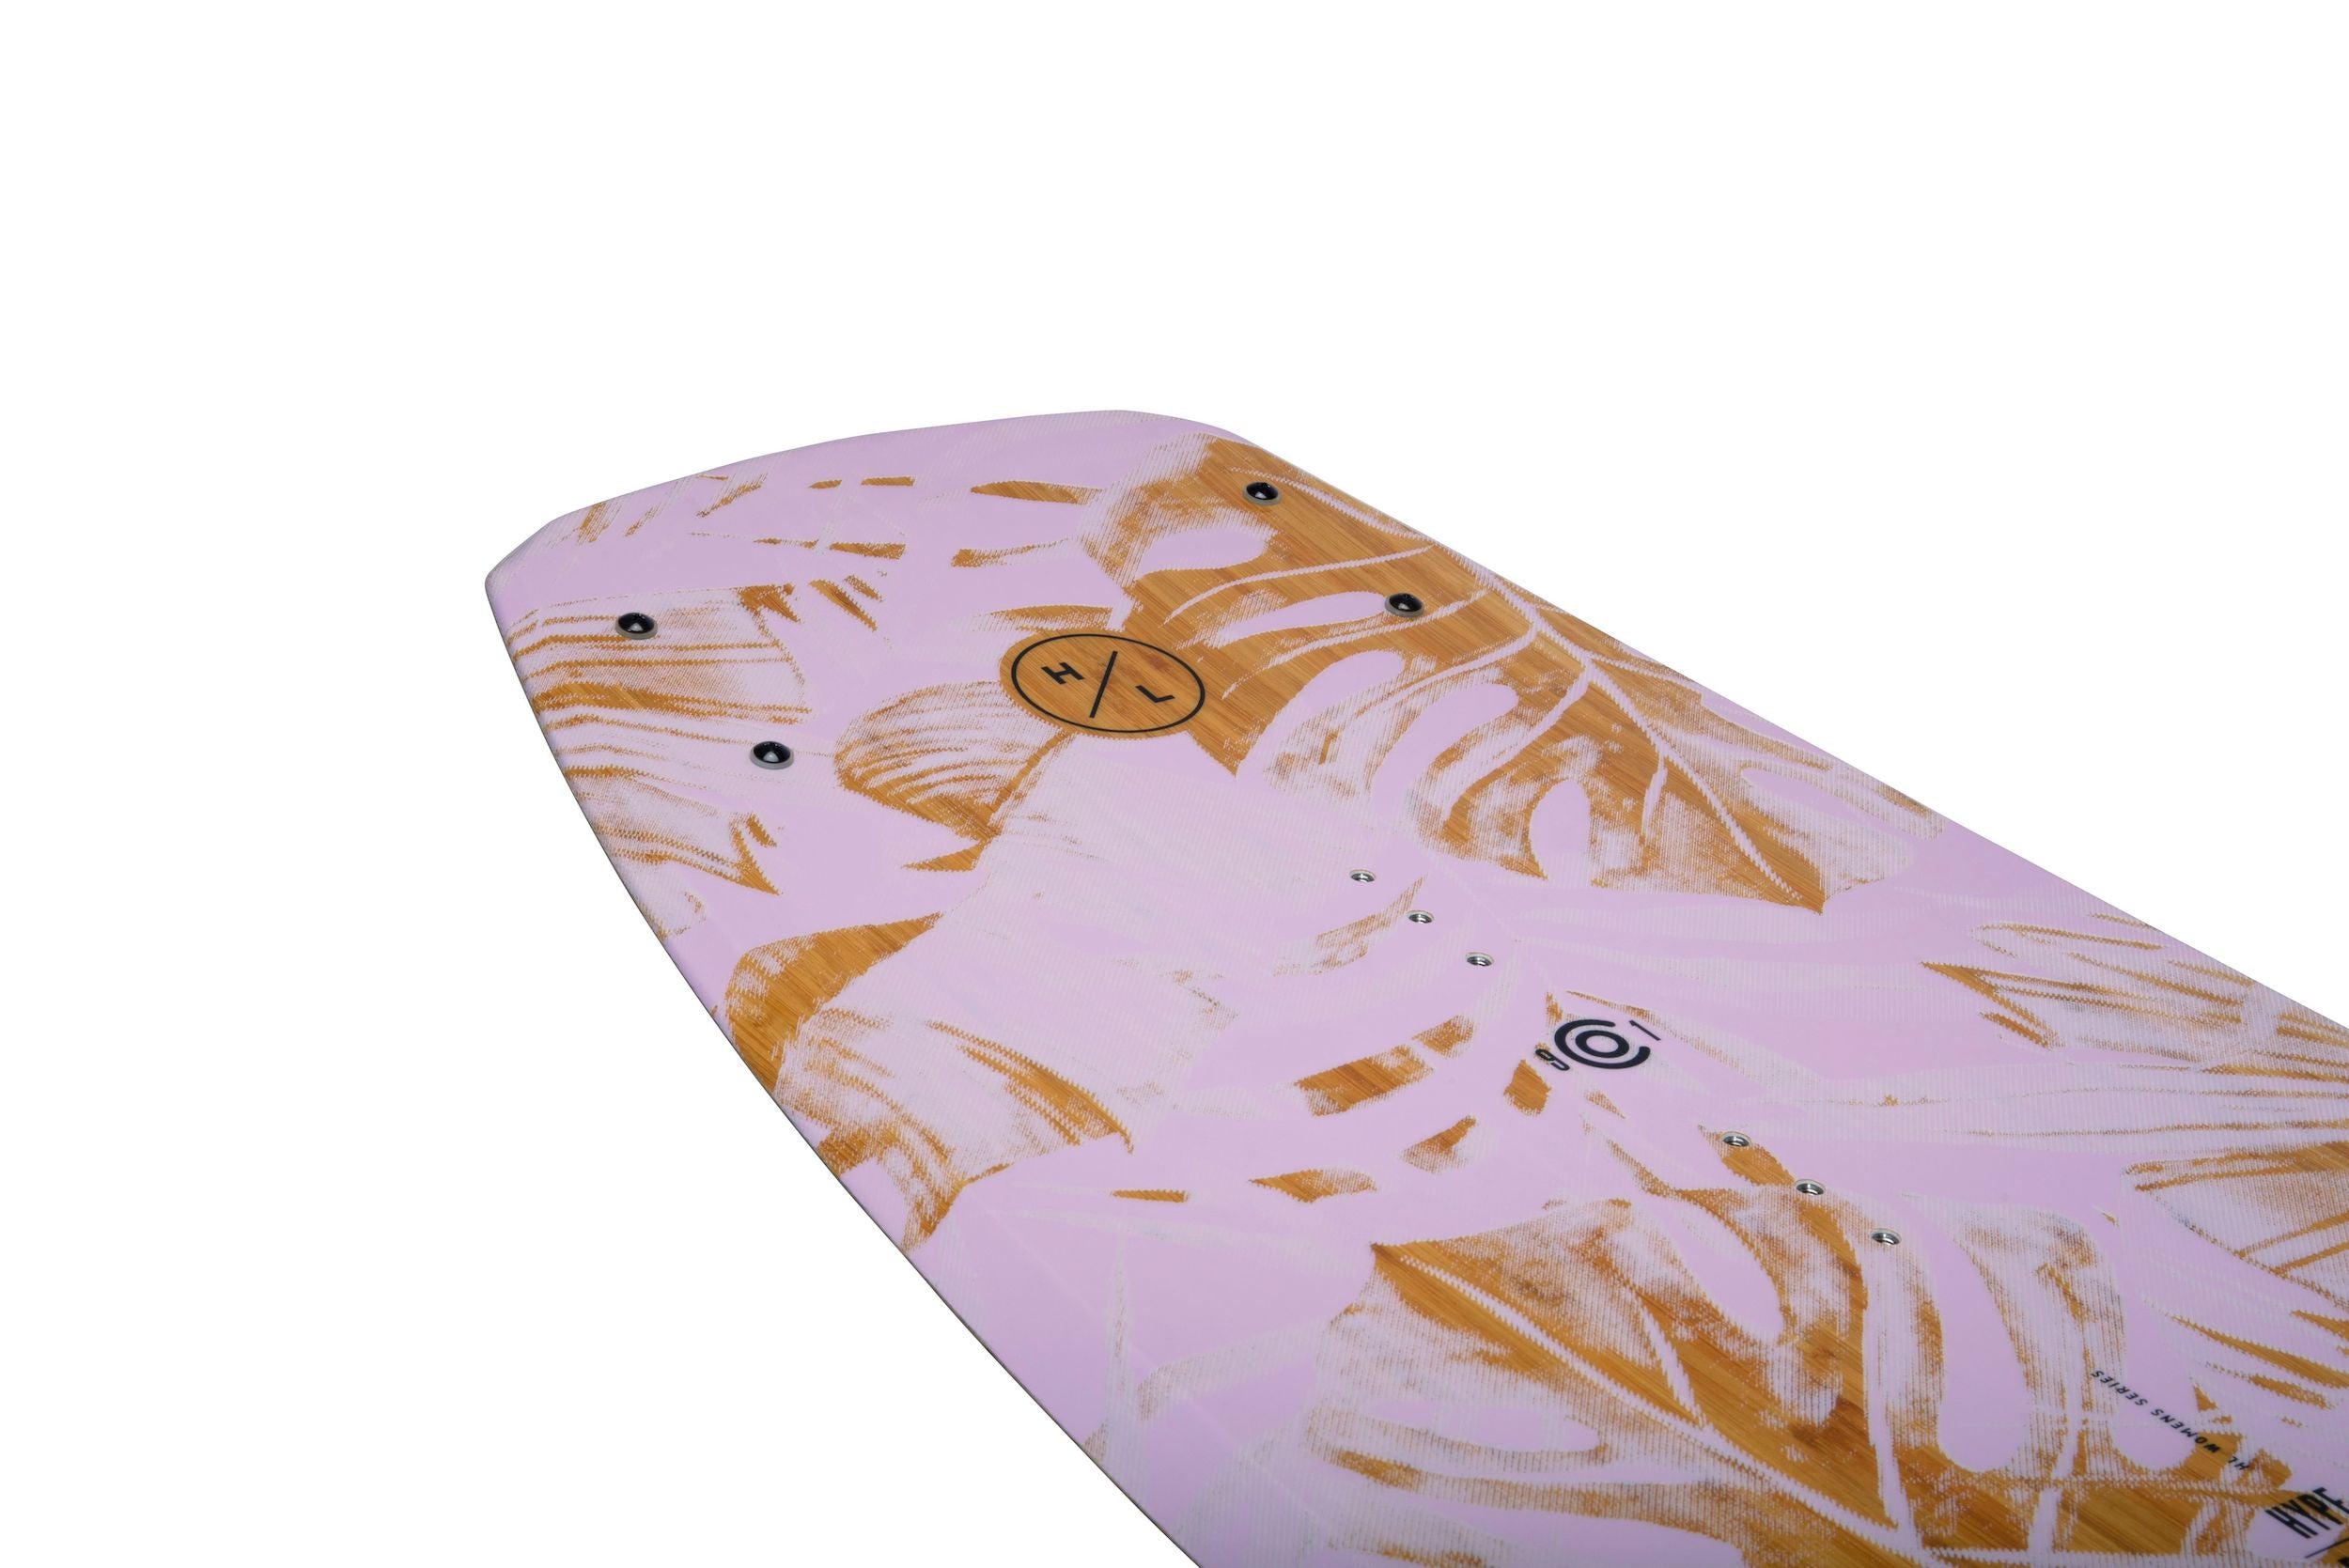 A Hyperlite 2023 Prizm wakeboard with a Shaun Murray inspired pink and gold leaf design.